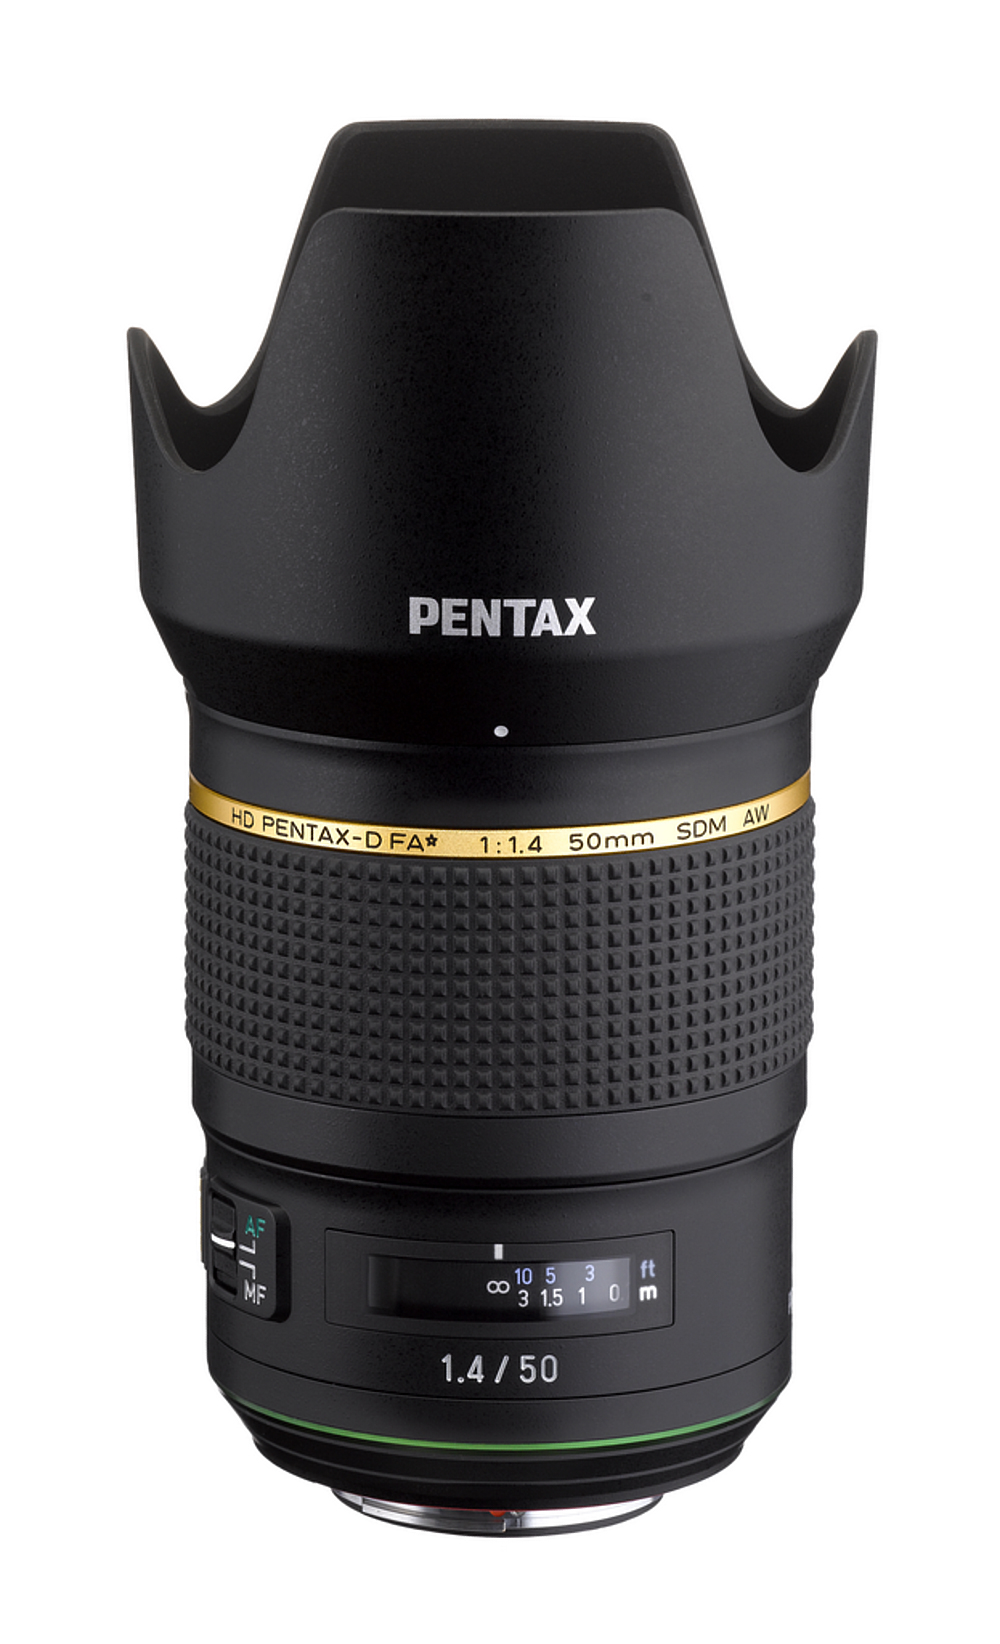 Ricoh Has a Brand New Pentax 50mm f1.4 For Your Pentax K-1